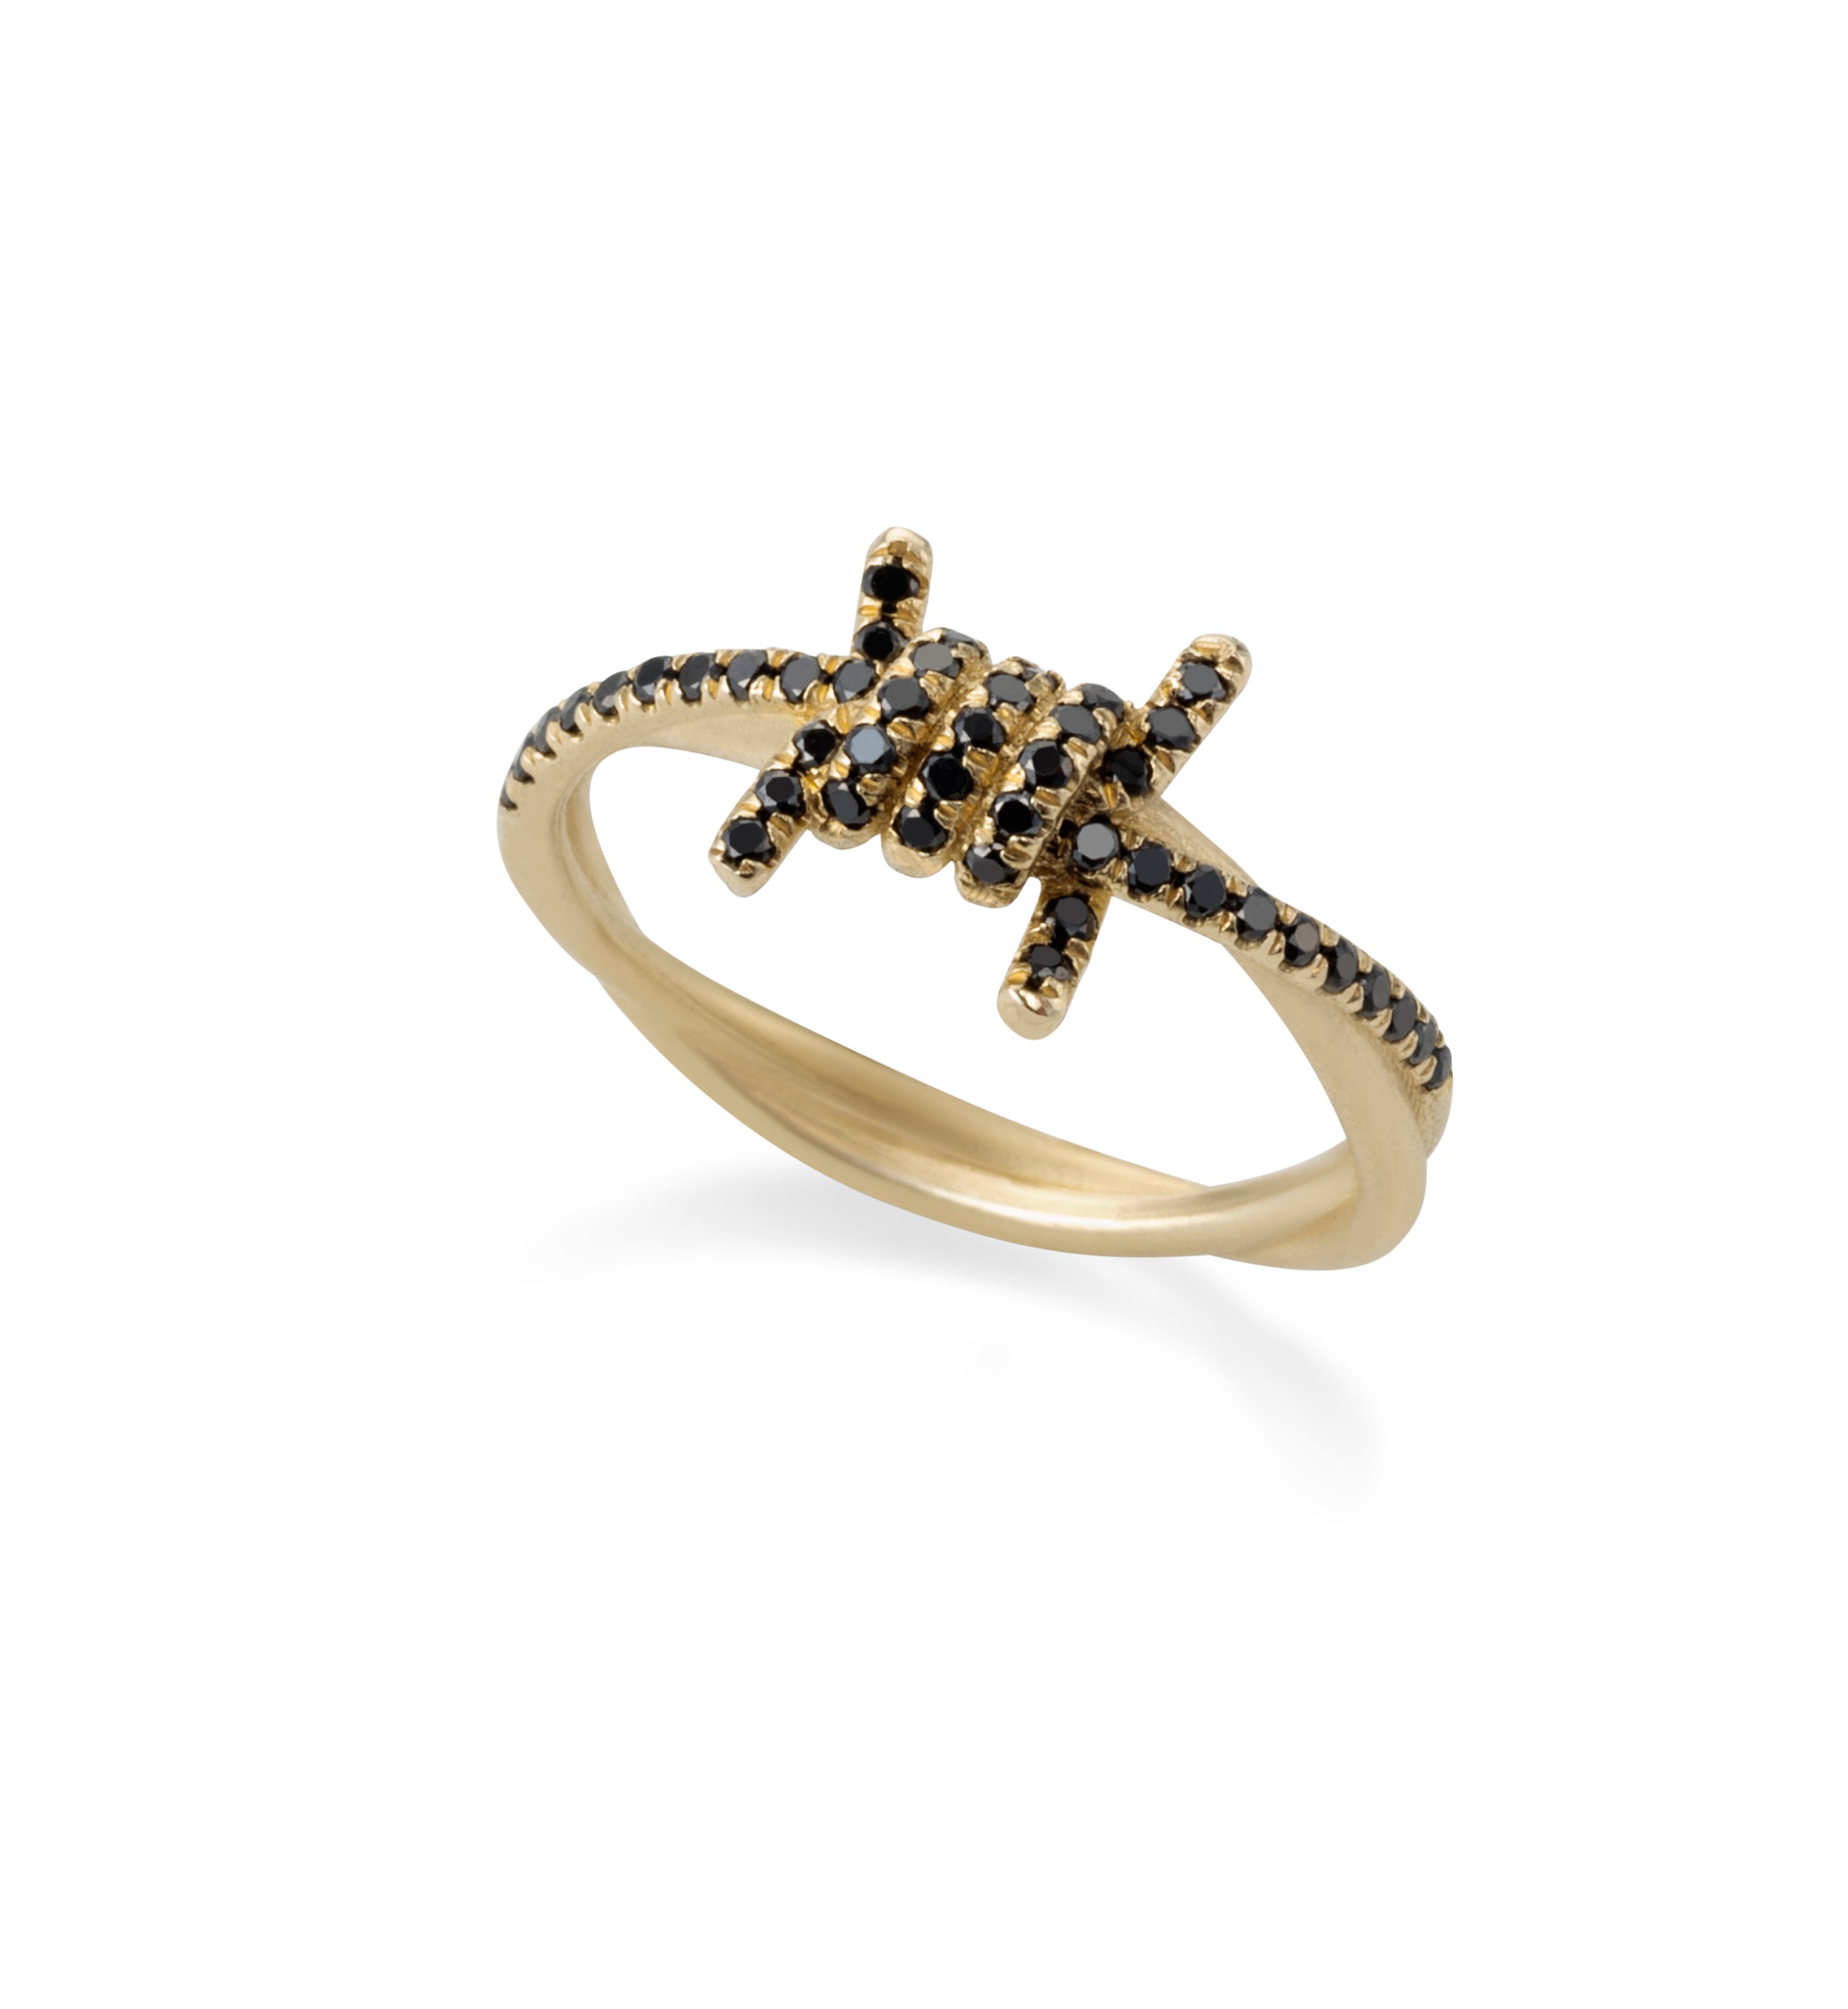 Buy 14k Barbed Wire Ring Online In India - Etsy India